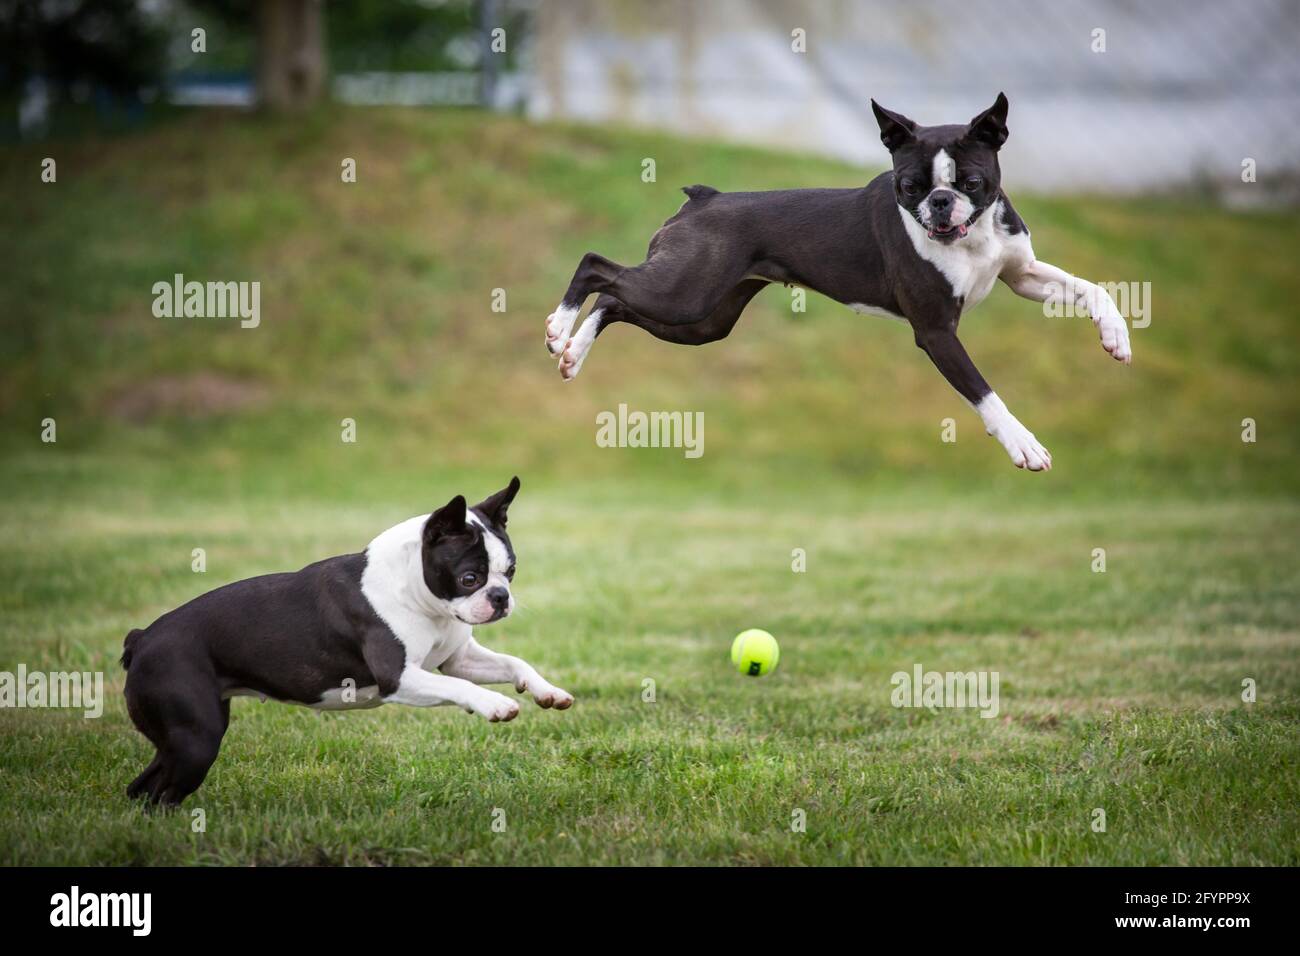 what 2 breeds make a boston terrier